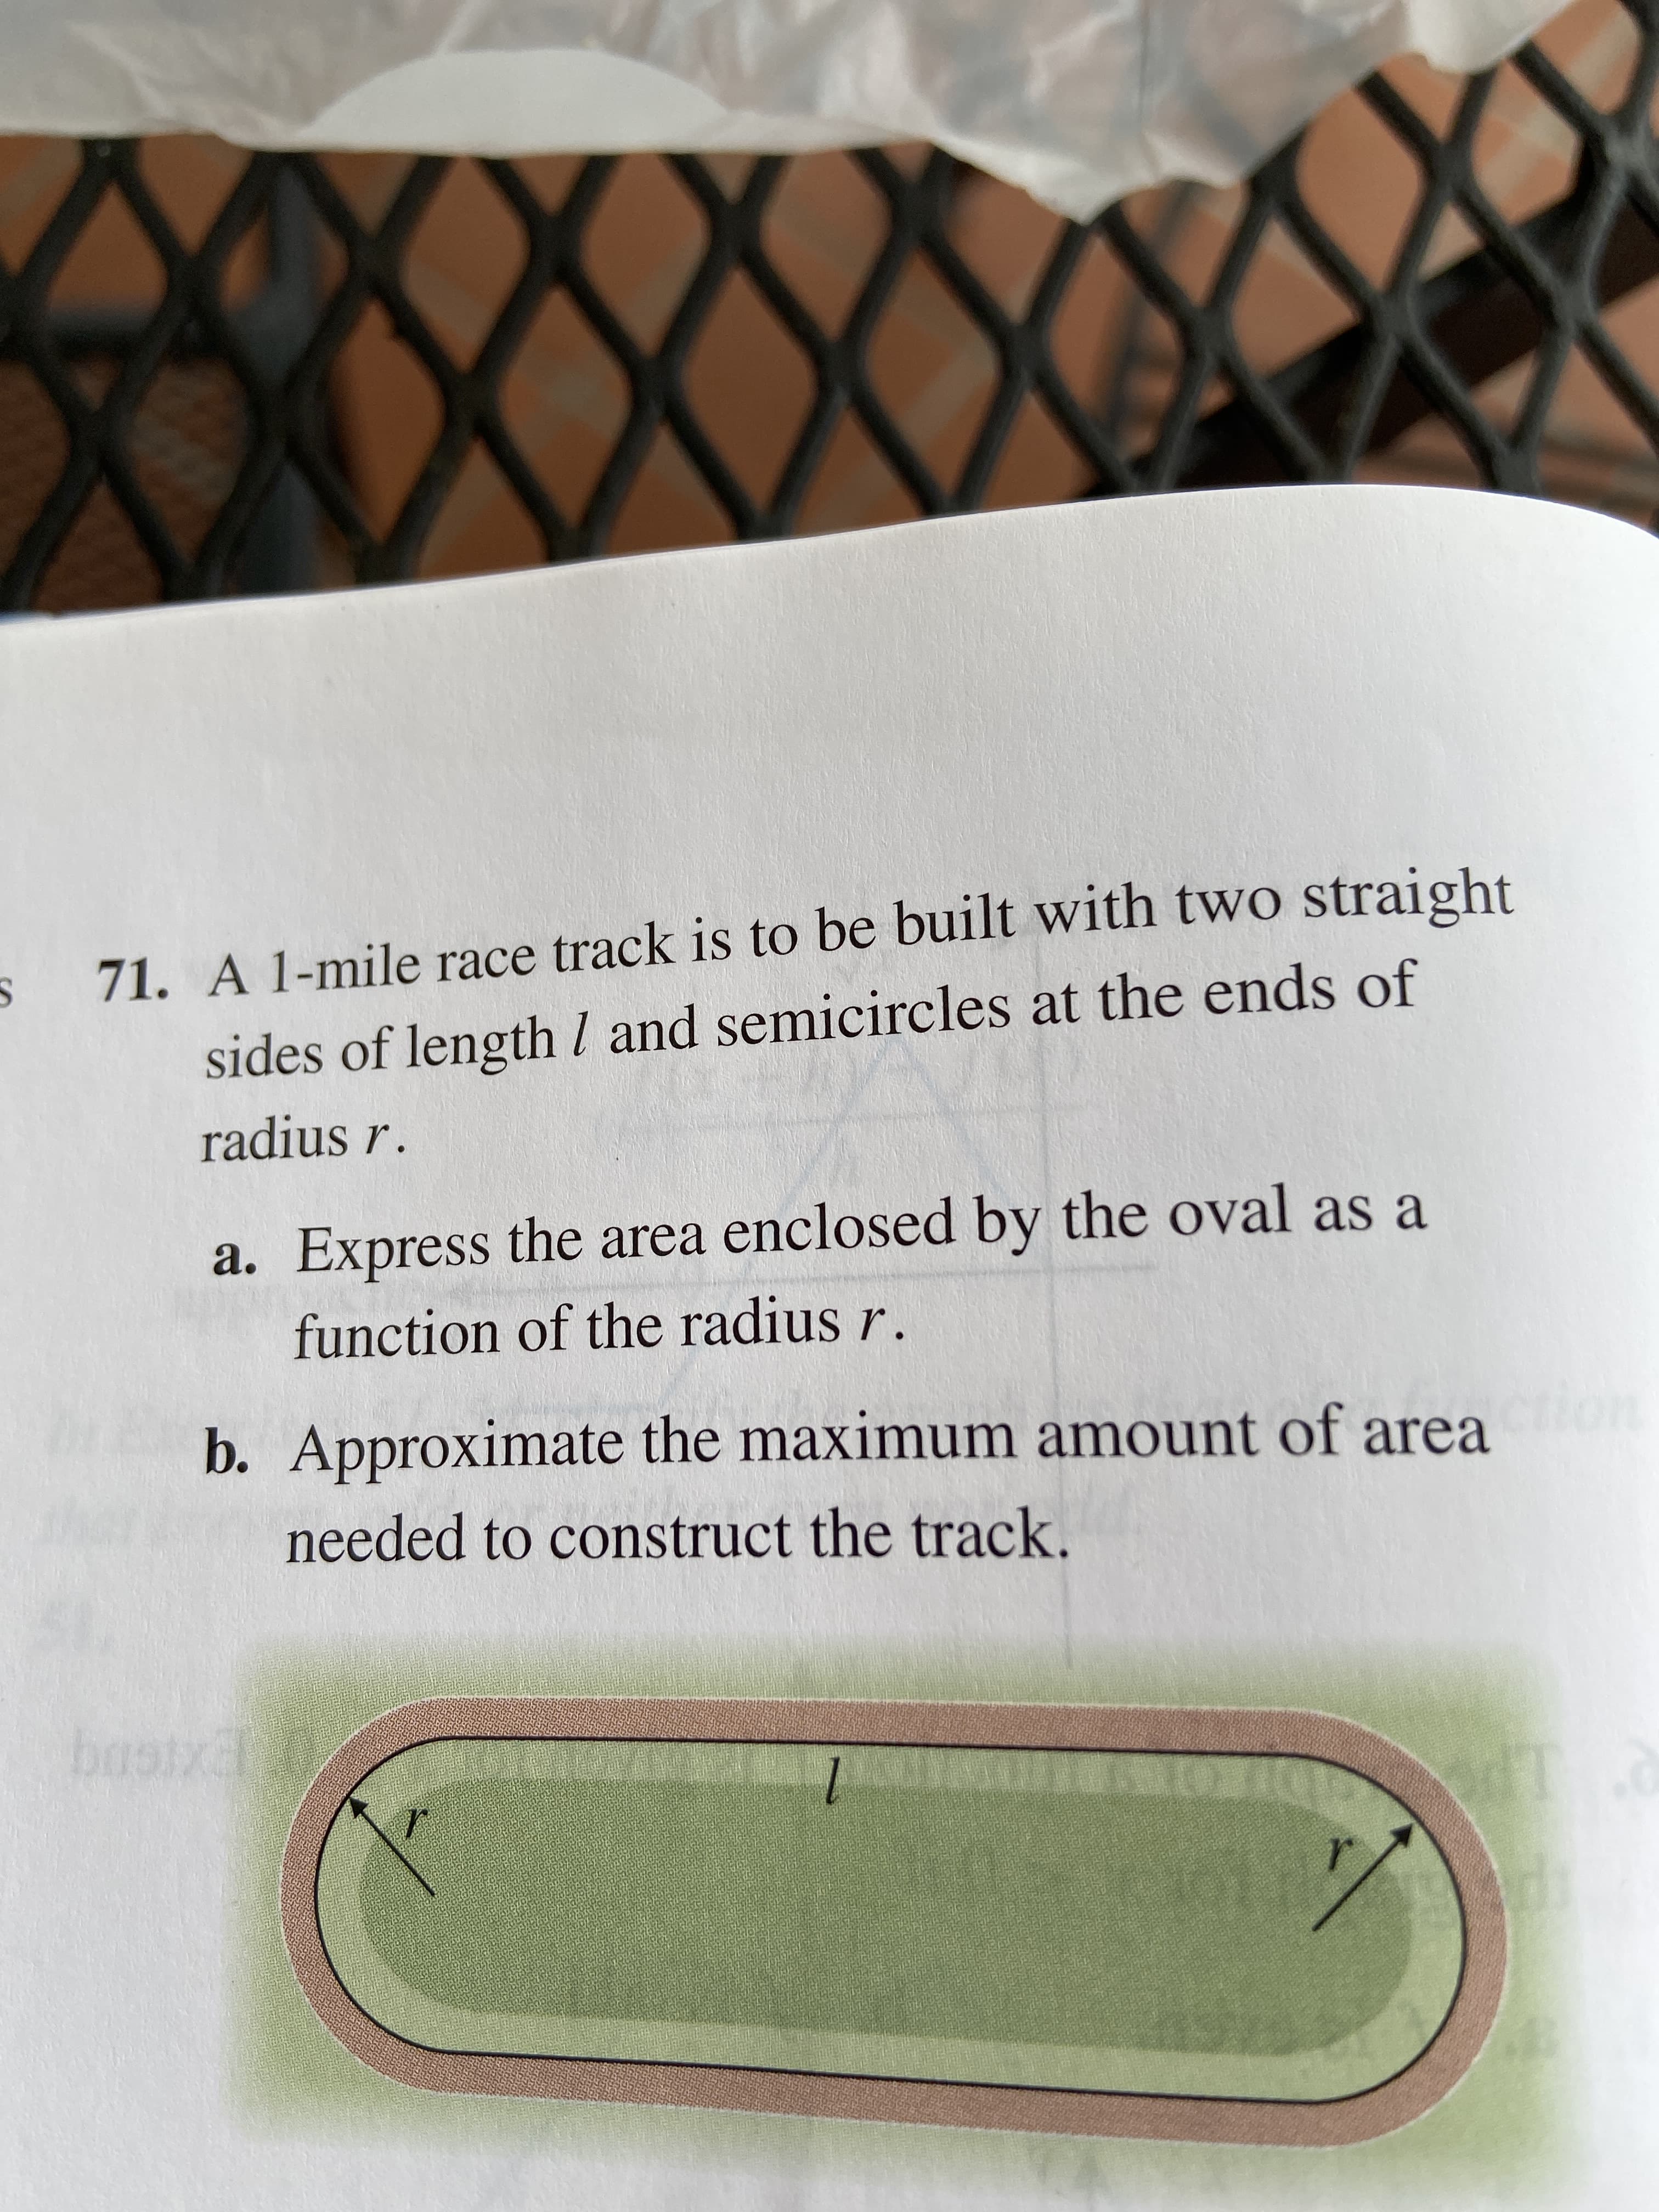 $71. A 1-mile race track is to be built with two straight
sides of lengthl and semicircles at the ends of
radius r.
a. Express the area enclosed by the oval as a
function of the radius r.
b. Approximate the maximum amount of area
needed to construct the track.
basix
